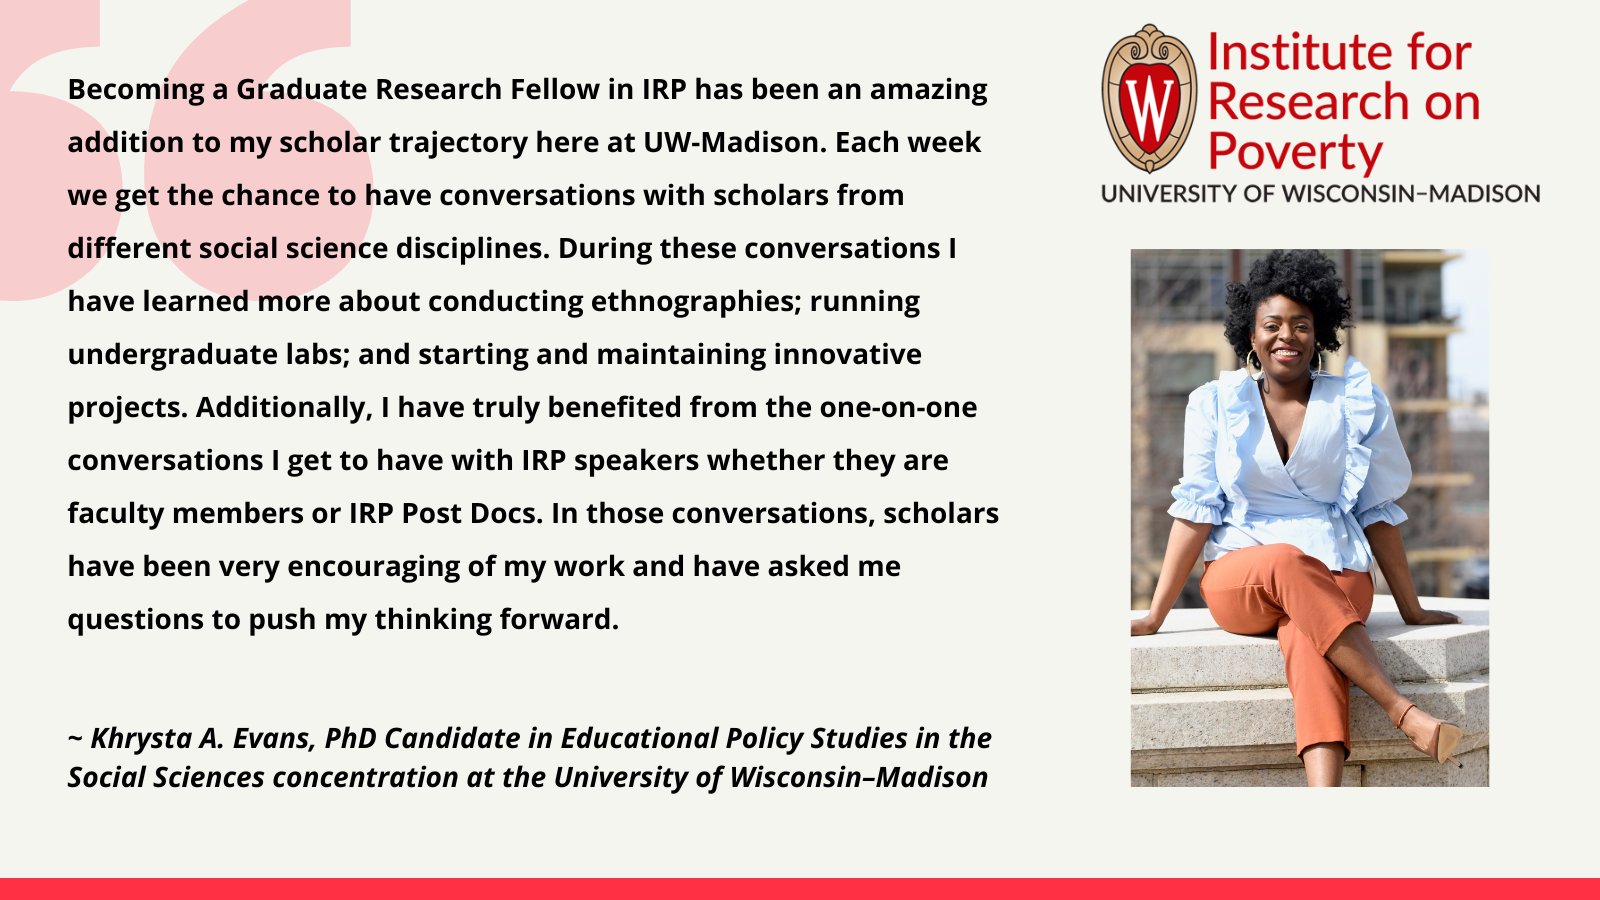 Khrysta A. Evans, PhD Candidate in Educational Policy Studies in the Social Sciences concentration at the University of Wisconsin–Madison: Becoming a Graduate Research Fellow in IRP has been an amazing addition to my scholar trajectory here at UW-Madison. Each week we get the chance to have conversations with scholars from different social science disciplines. During these conversations I have learned more about conducting ethnographies; running undergraduate labs; and starting and maintaining innovative projects. Additionally, I have truly benefited from the one-on-one conversations I get to have with IRP speakers whether they are faculty members or IRP Post Docs. In those conversations, scholars have been very encouraging of my work and have asked me questions to push my thinking forward.